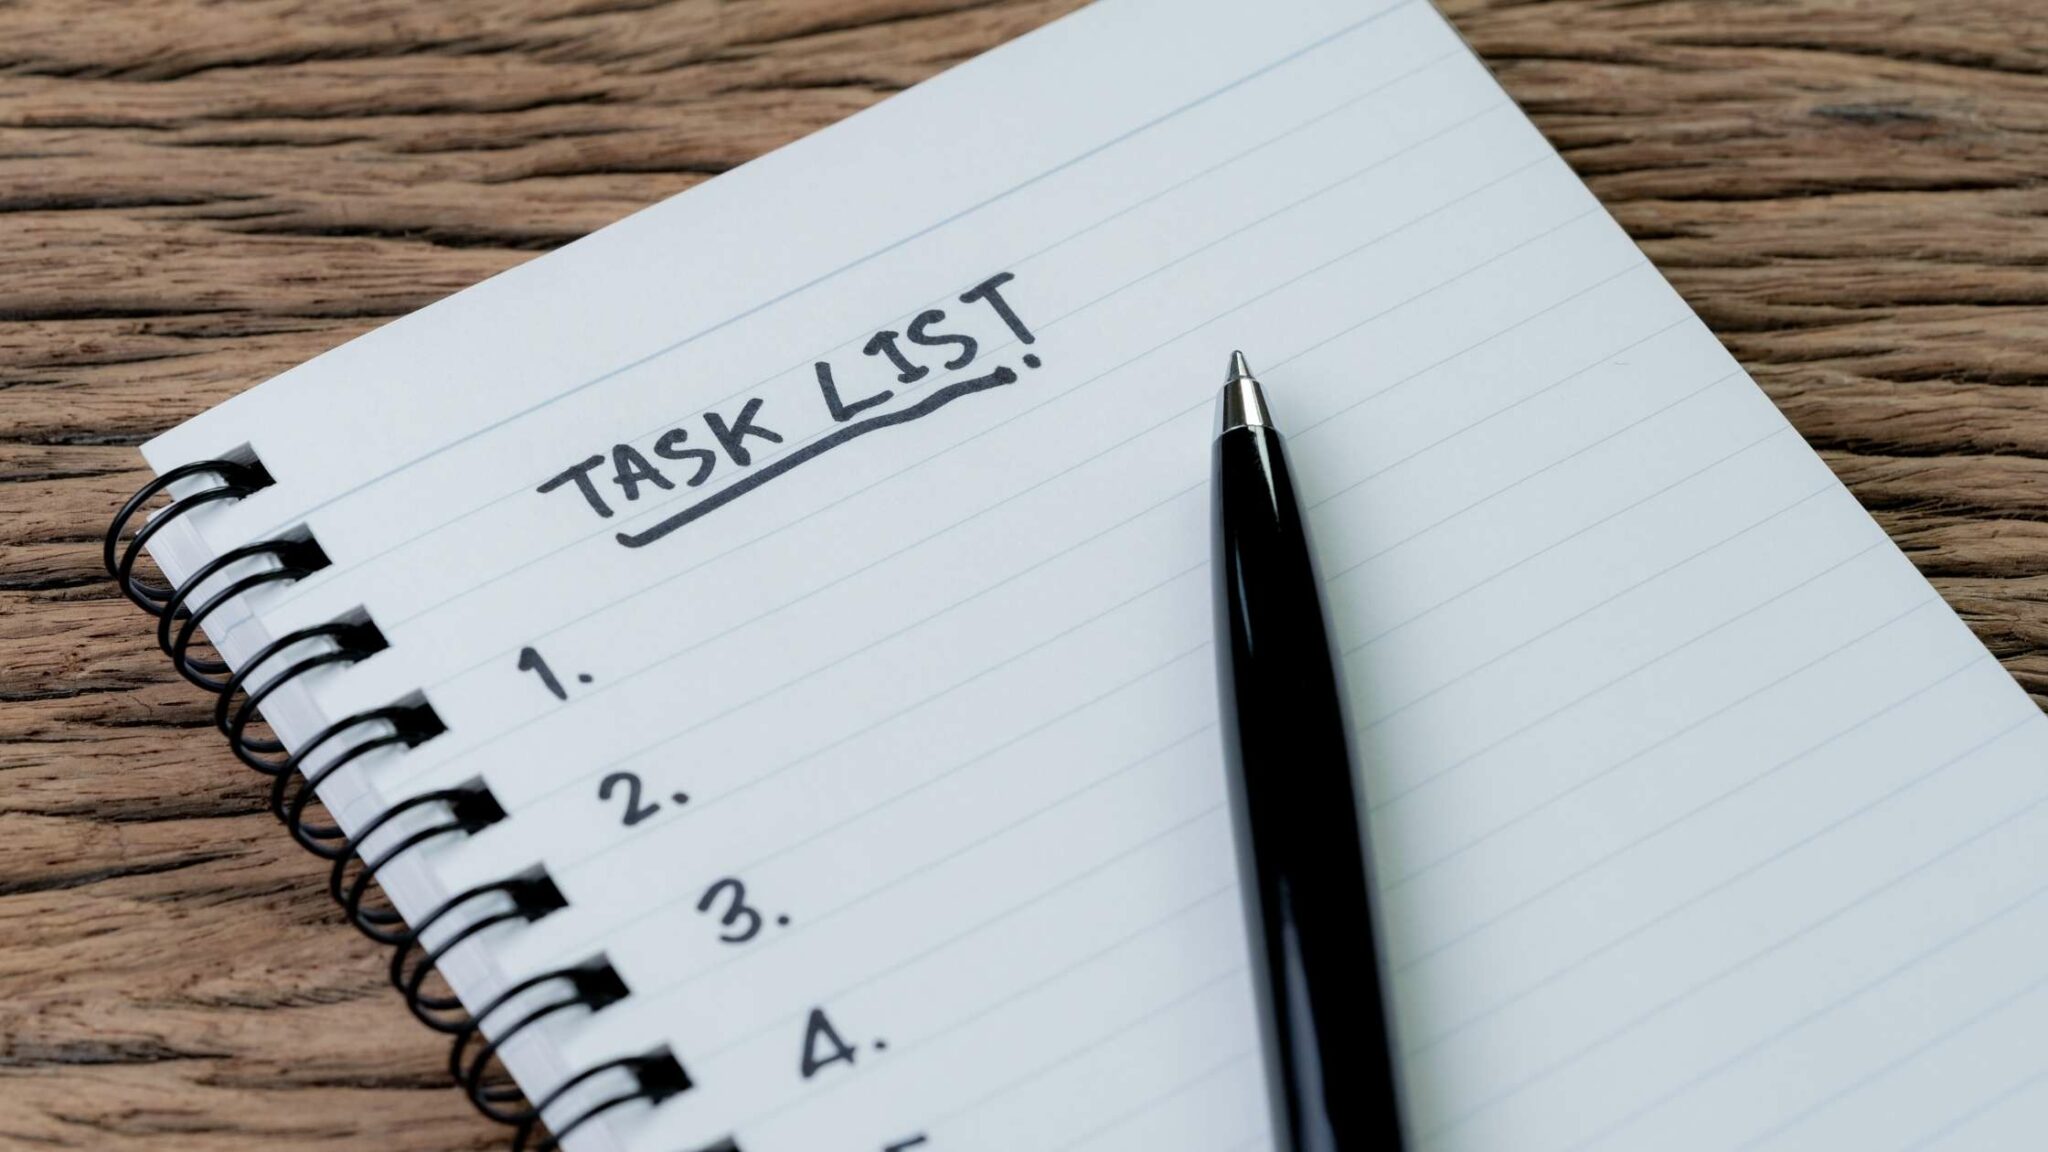 what is the meaning of task list